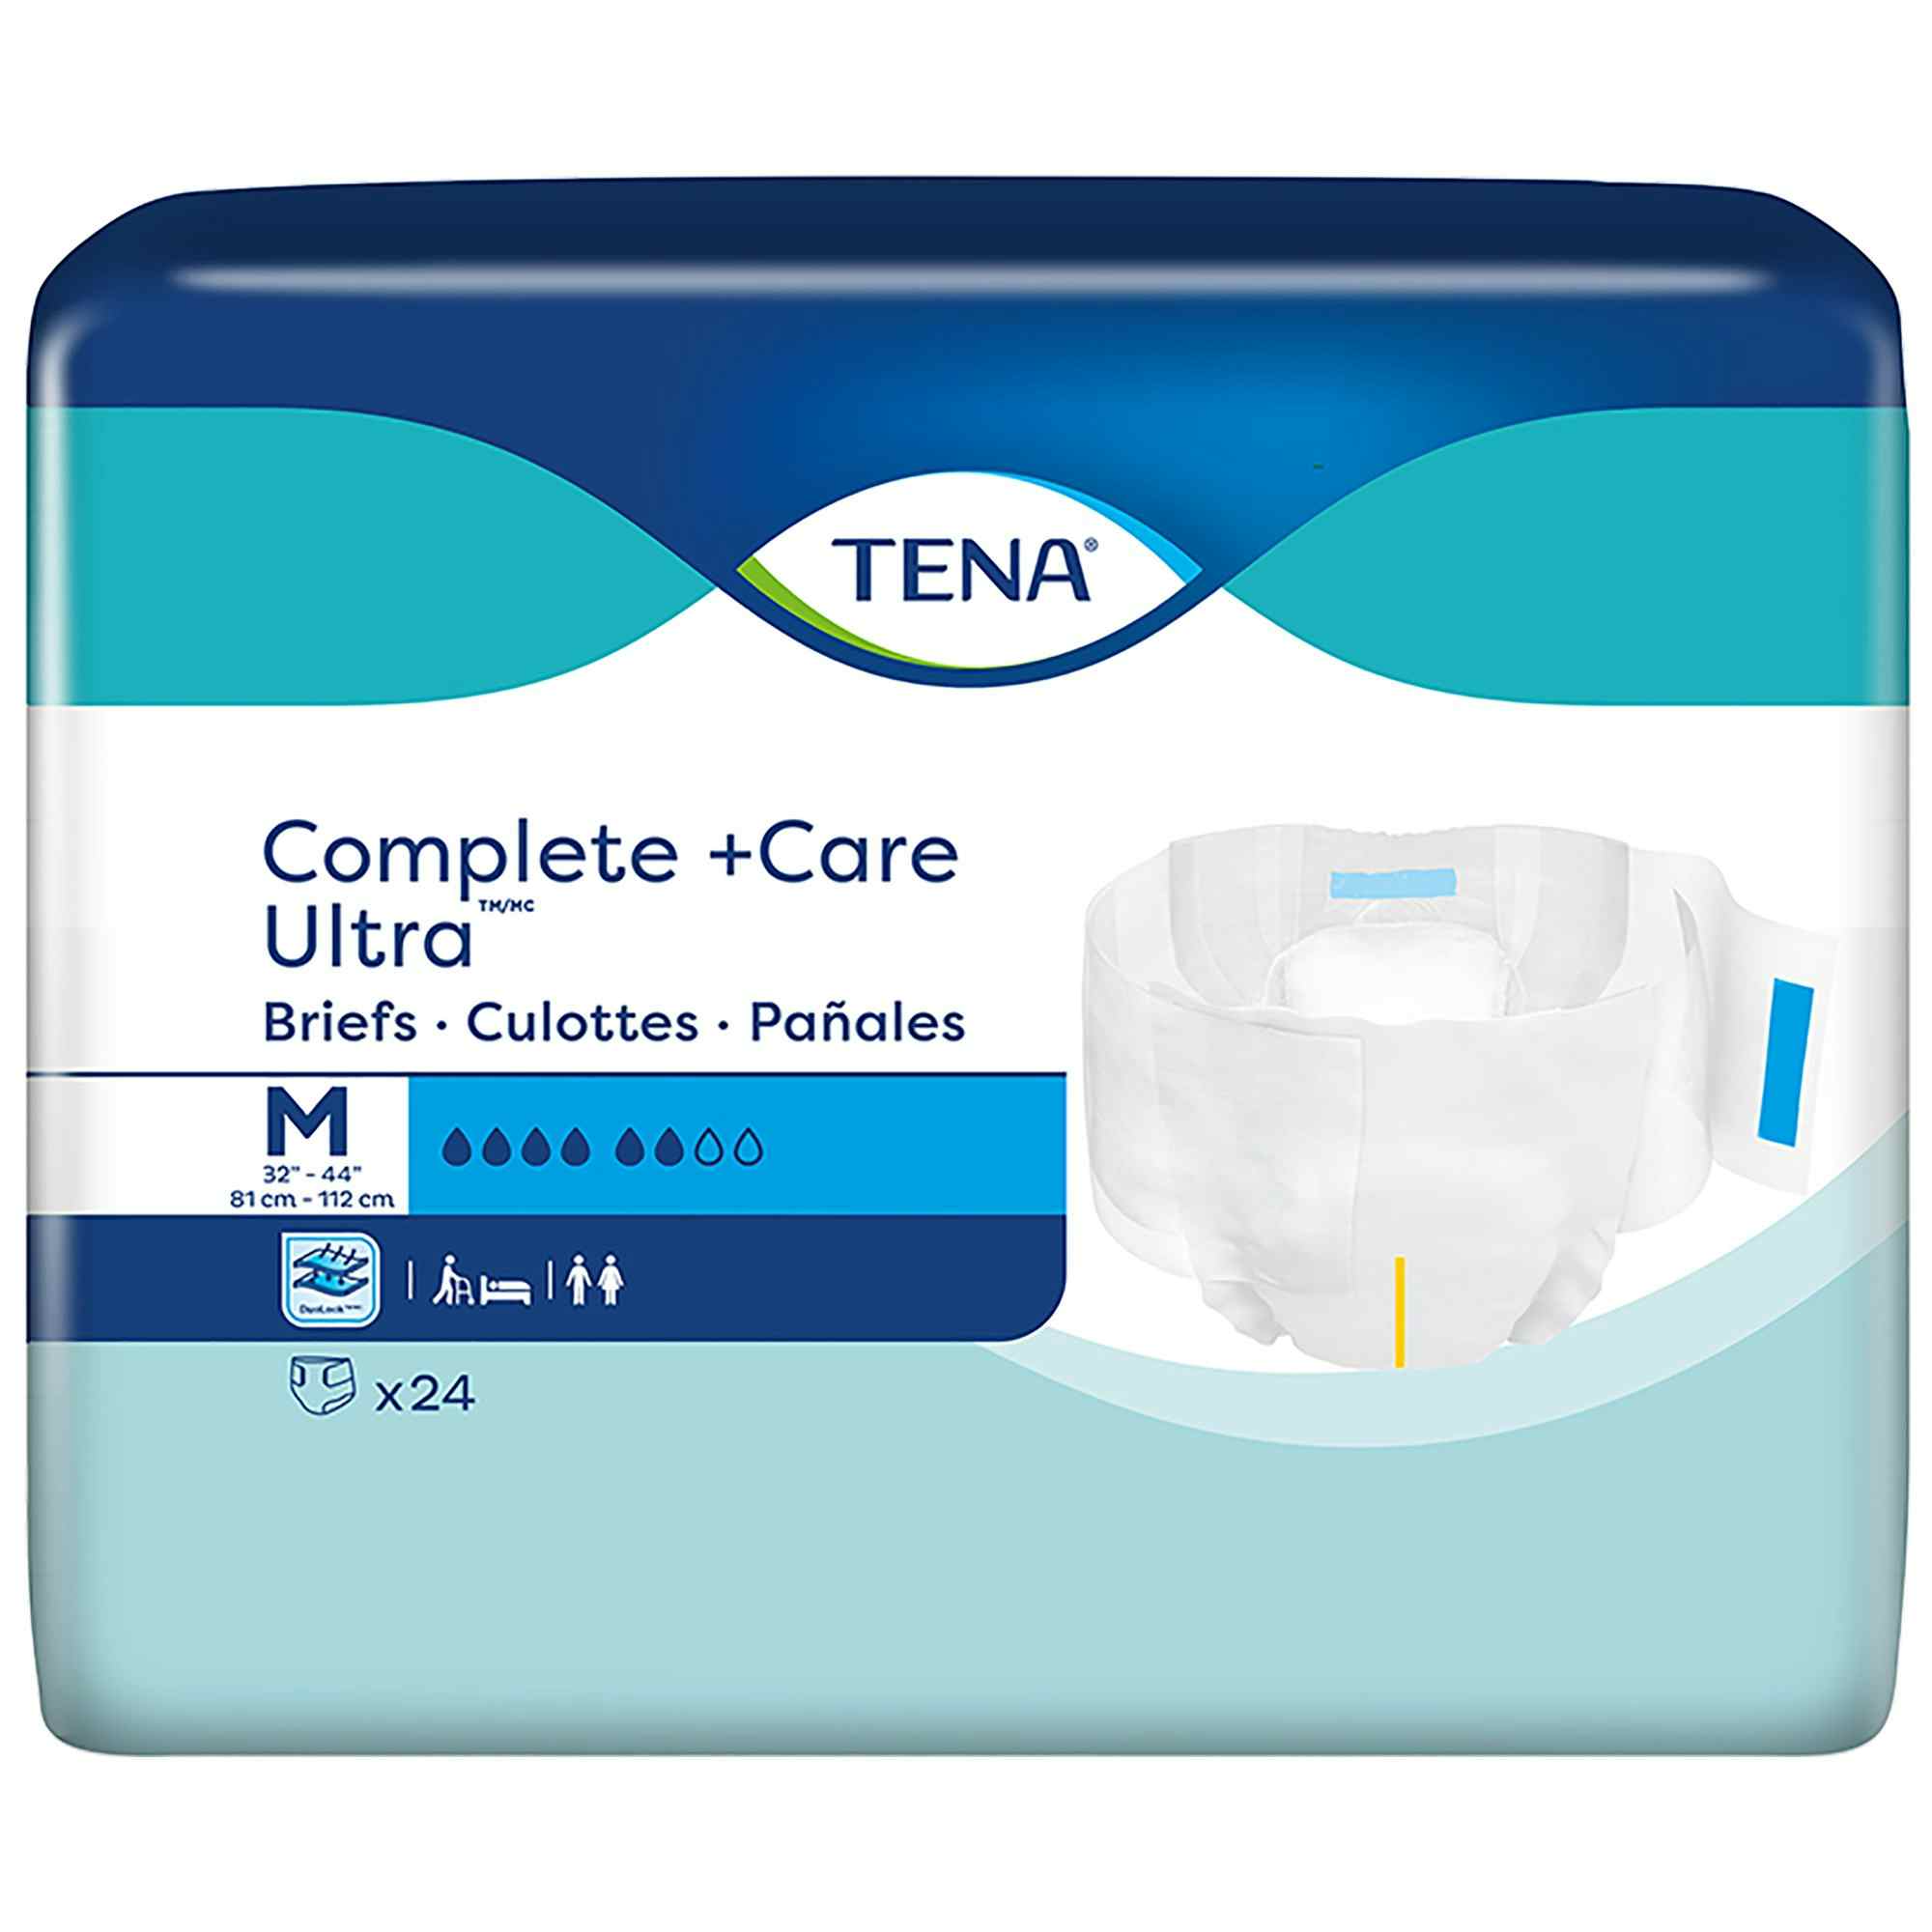 TENA Complete + Care Ultra Unisex Adult Disposable Diaper, Moderate Absorbency